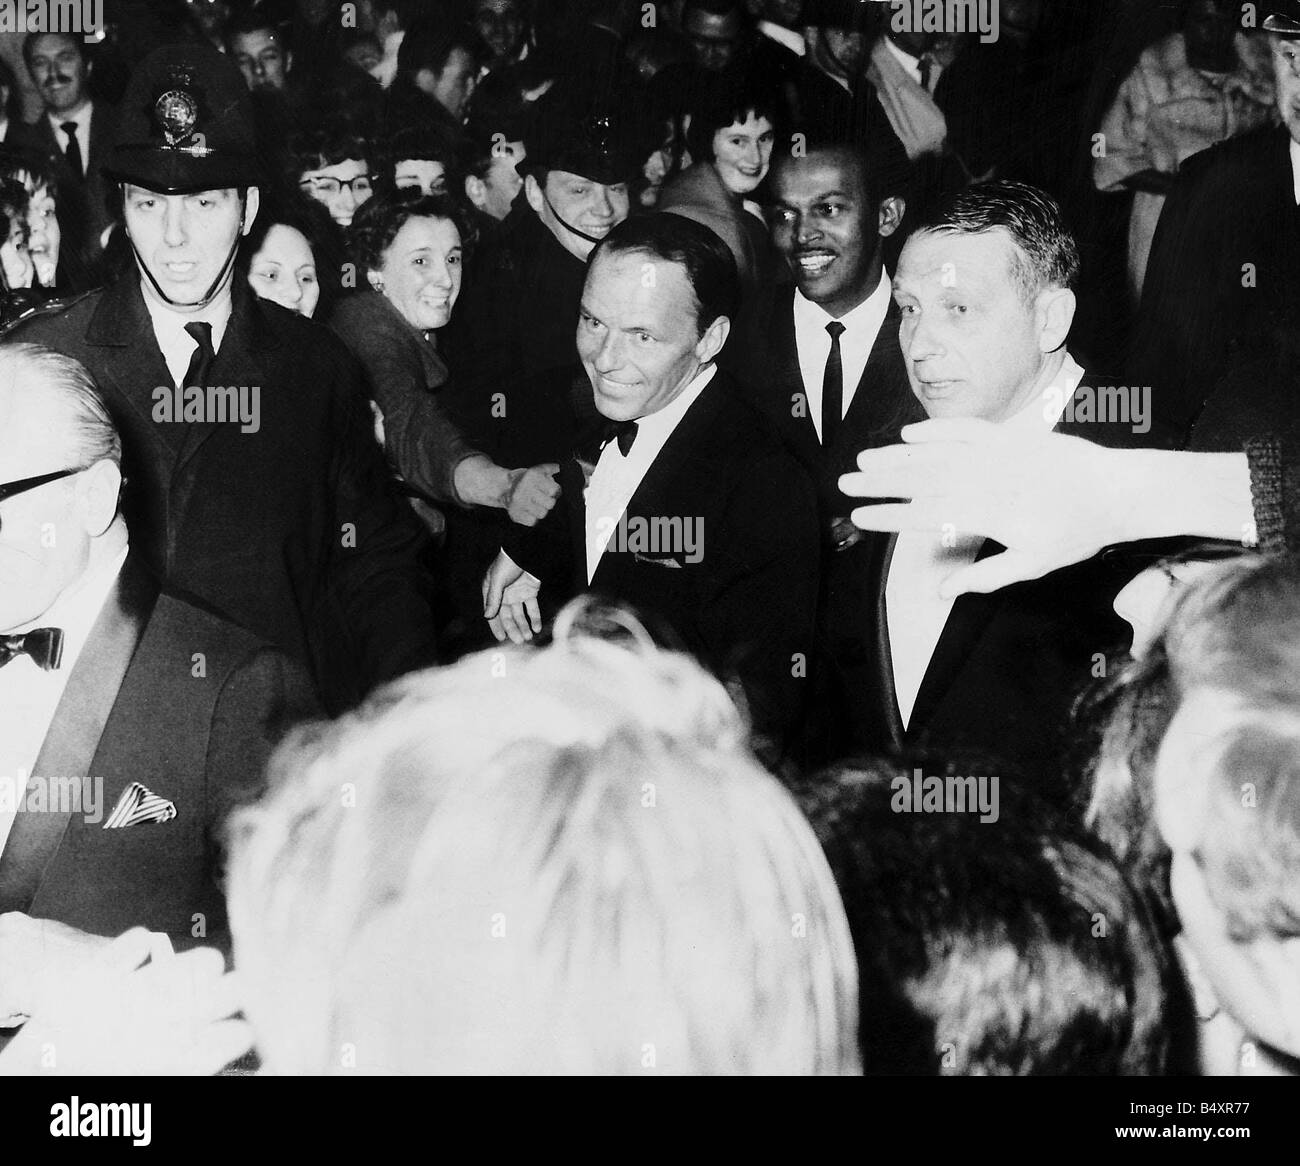 Frank Sinatra at his concert as woman fans try to grab him Stock Photo -  Alamy